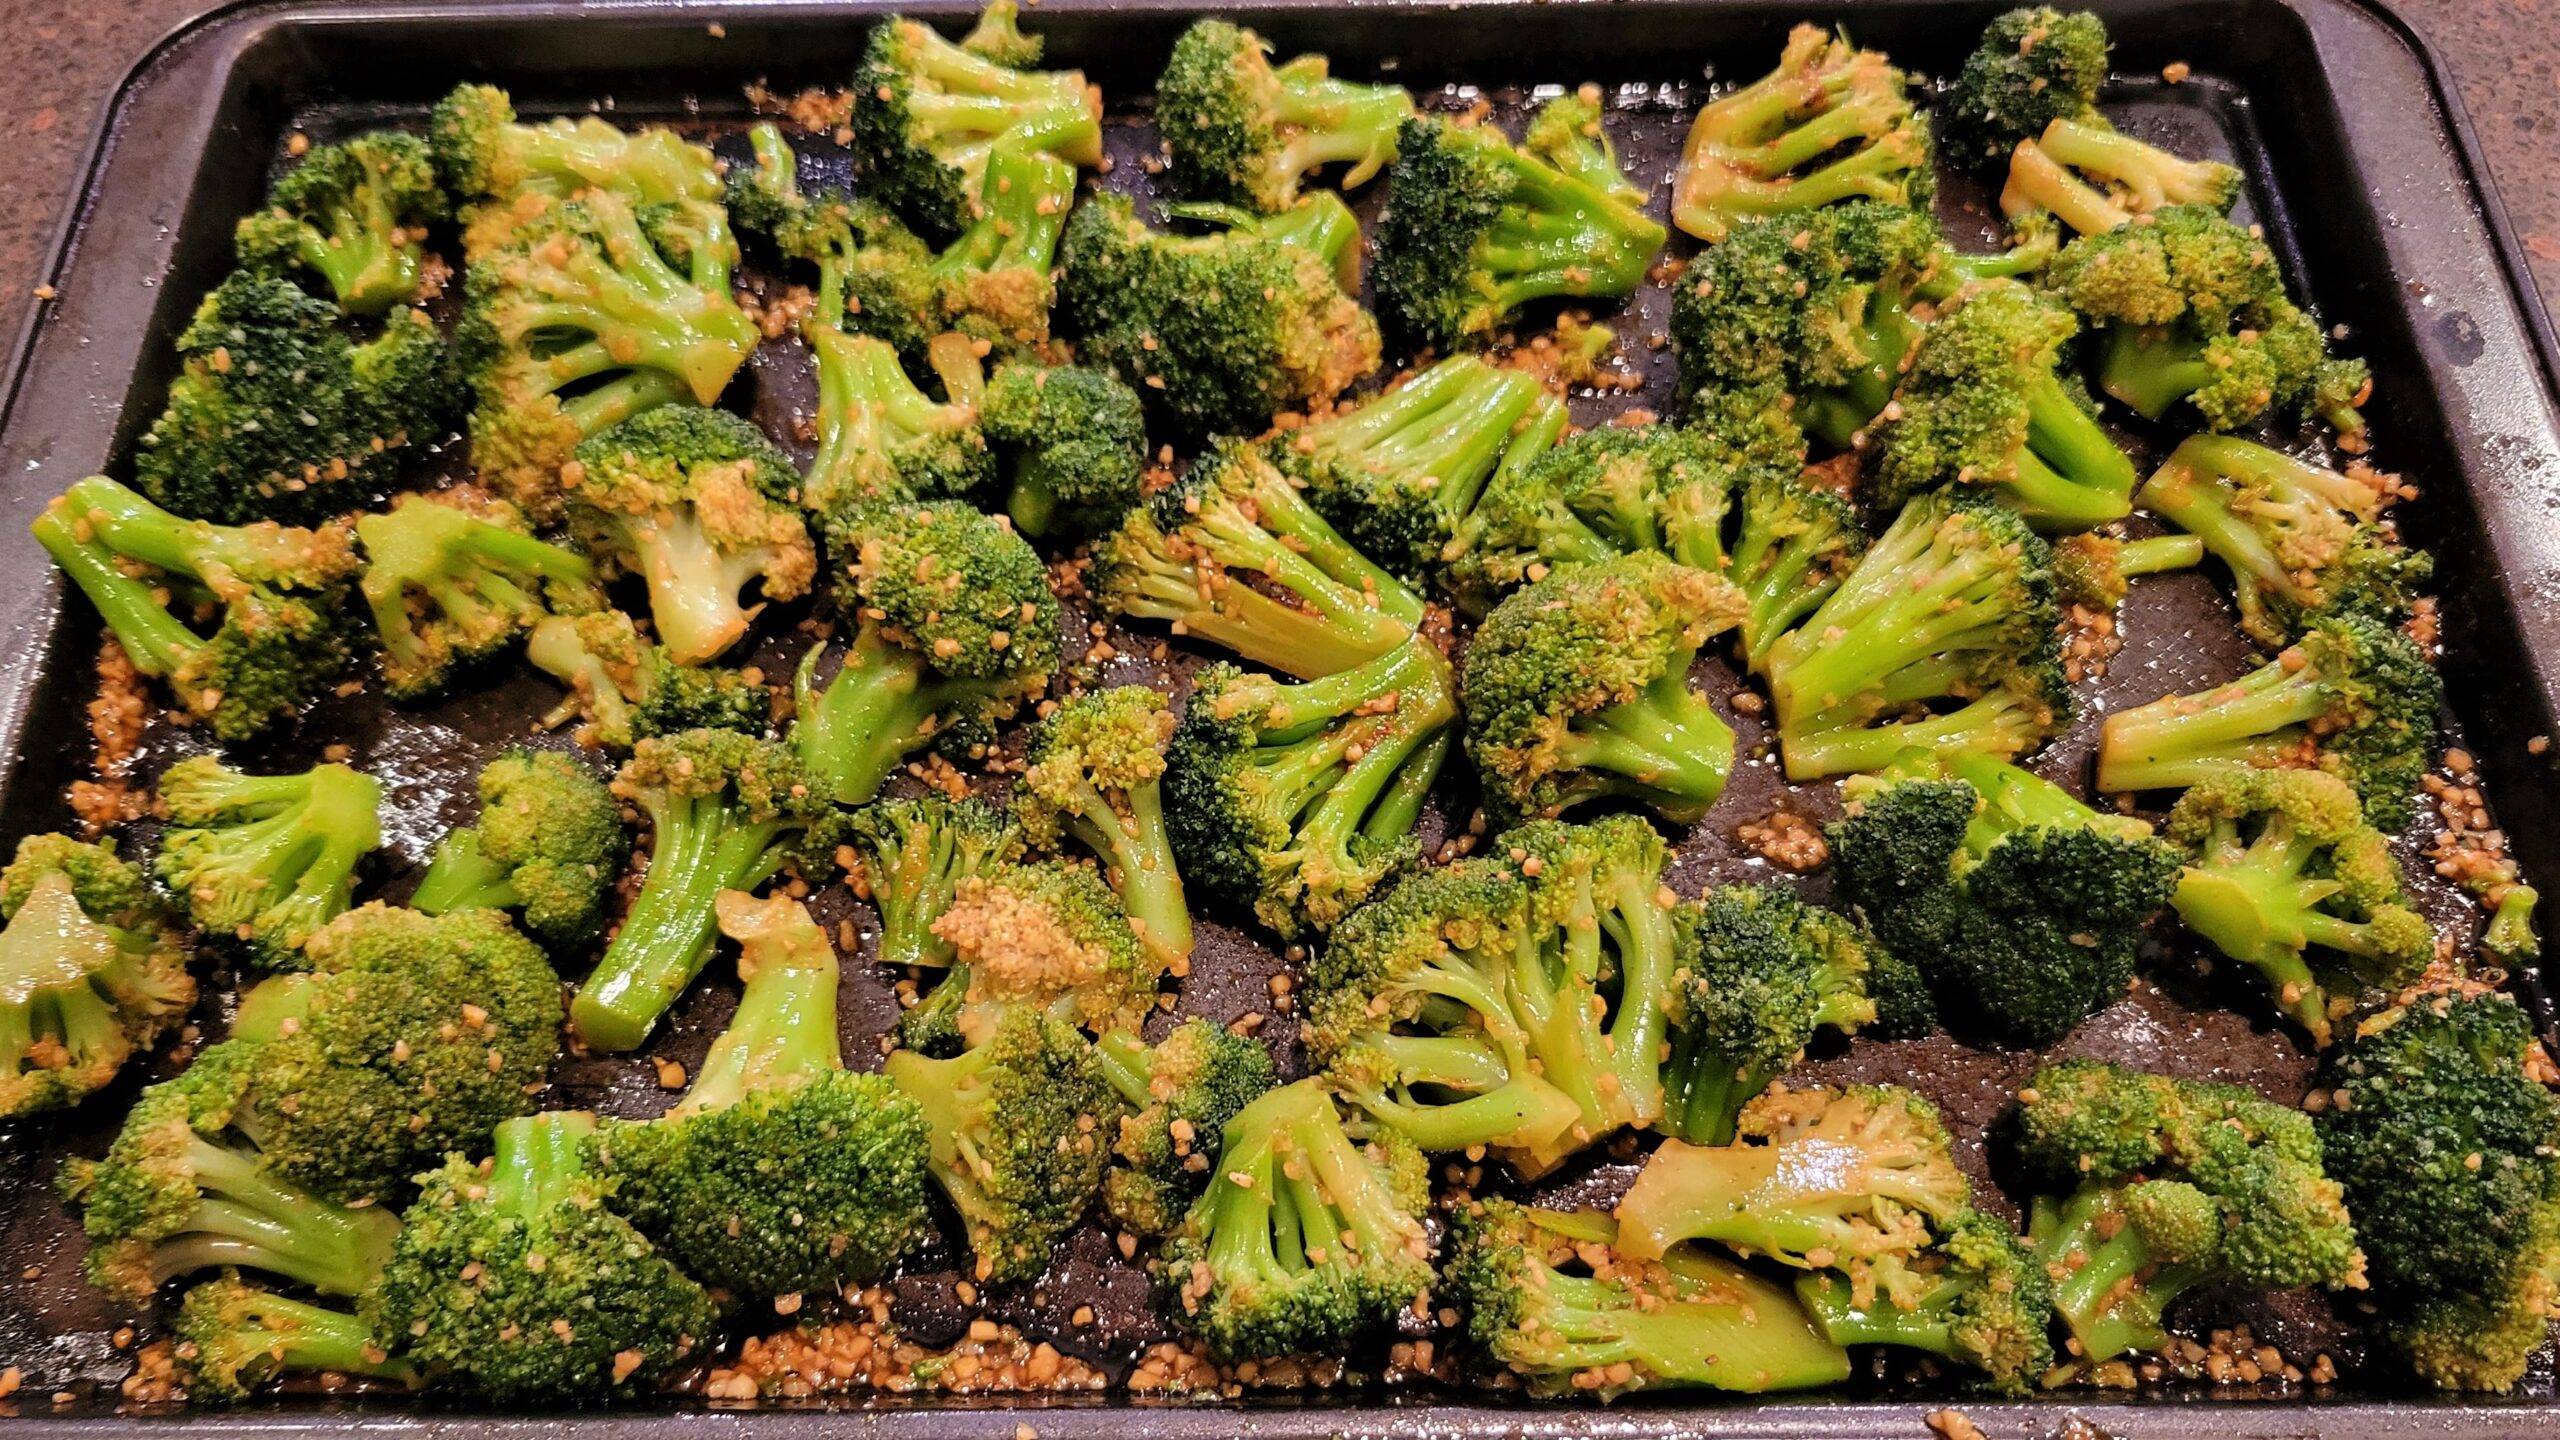 soy sauce broccoli - Dining in with Danielle